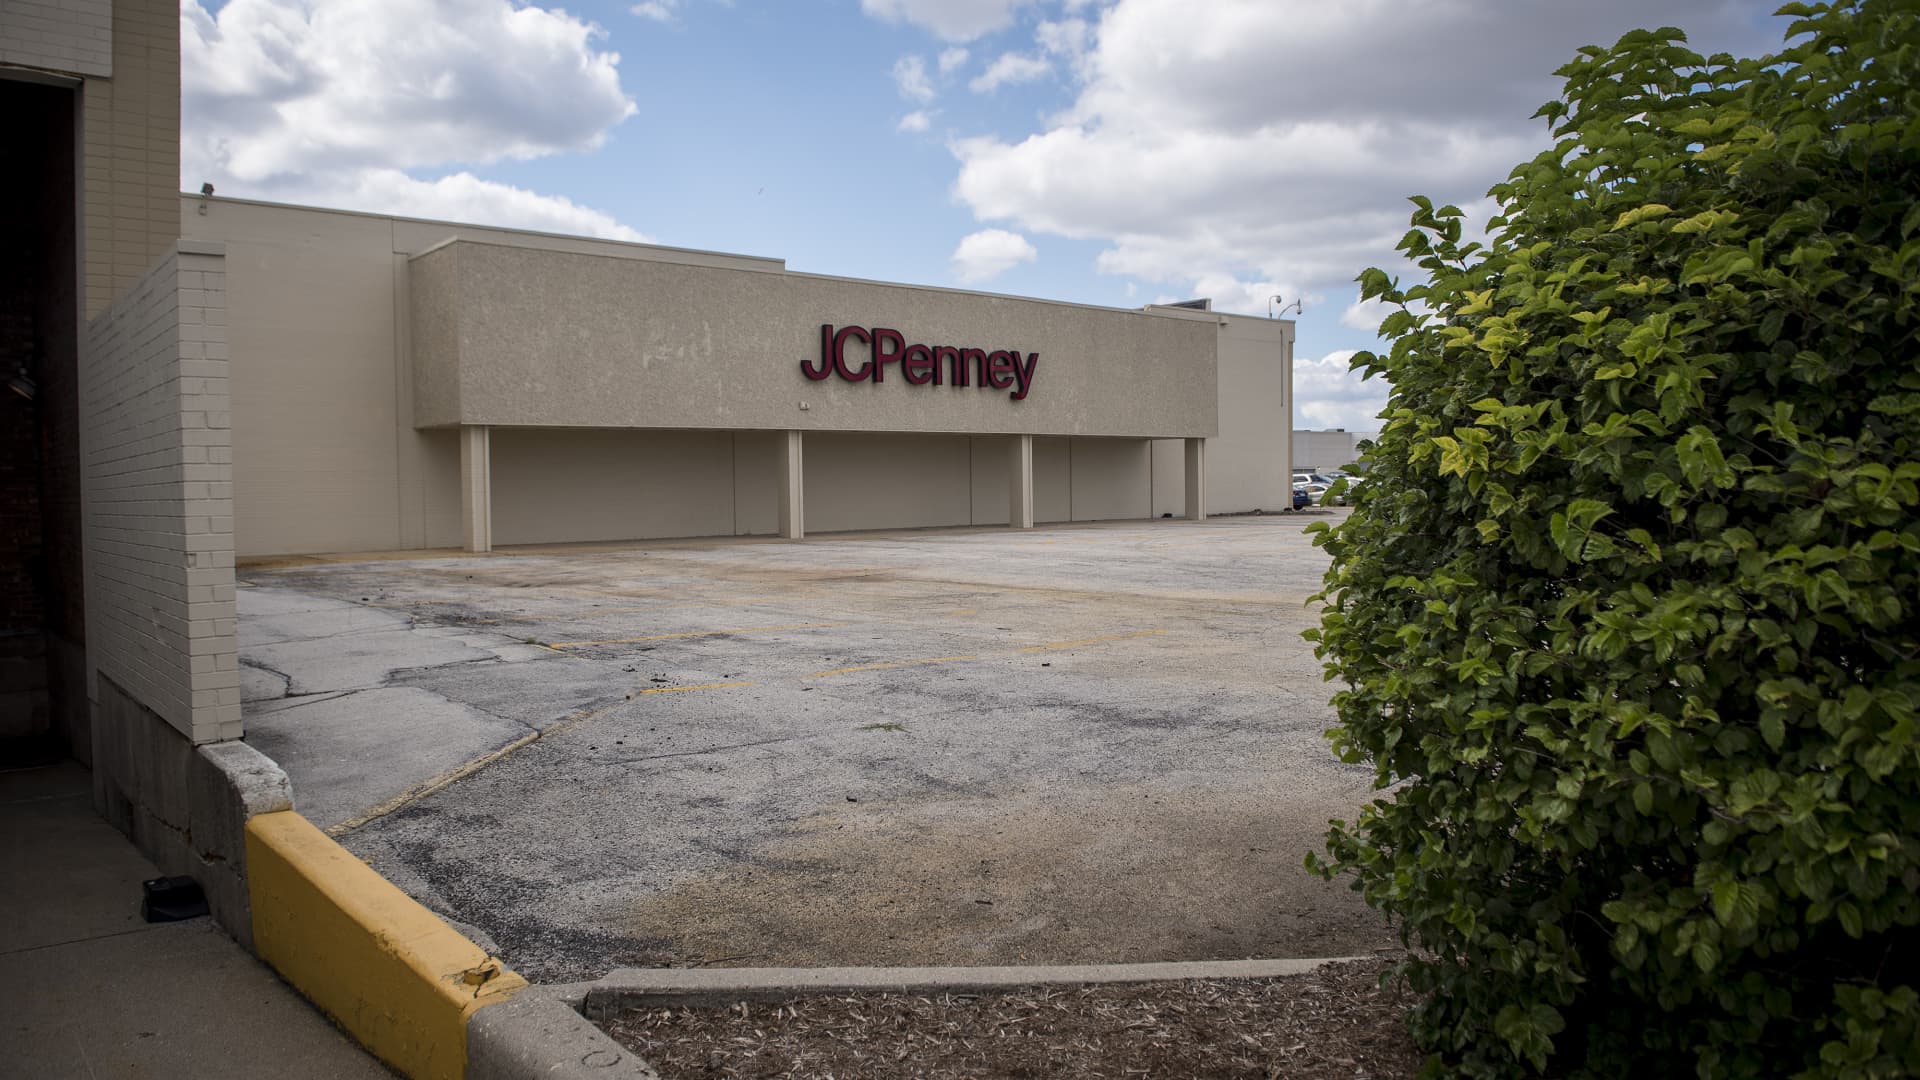 JC Penney: We haven't hired advisors 'to prepare for an in-court restructuring or bankruptcy'